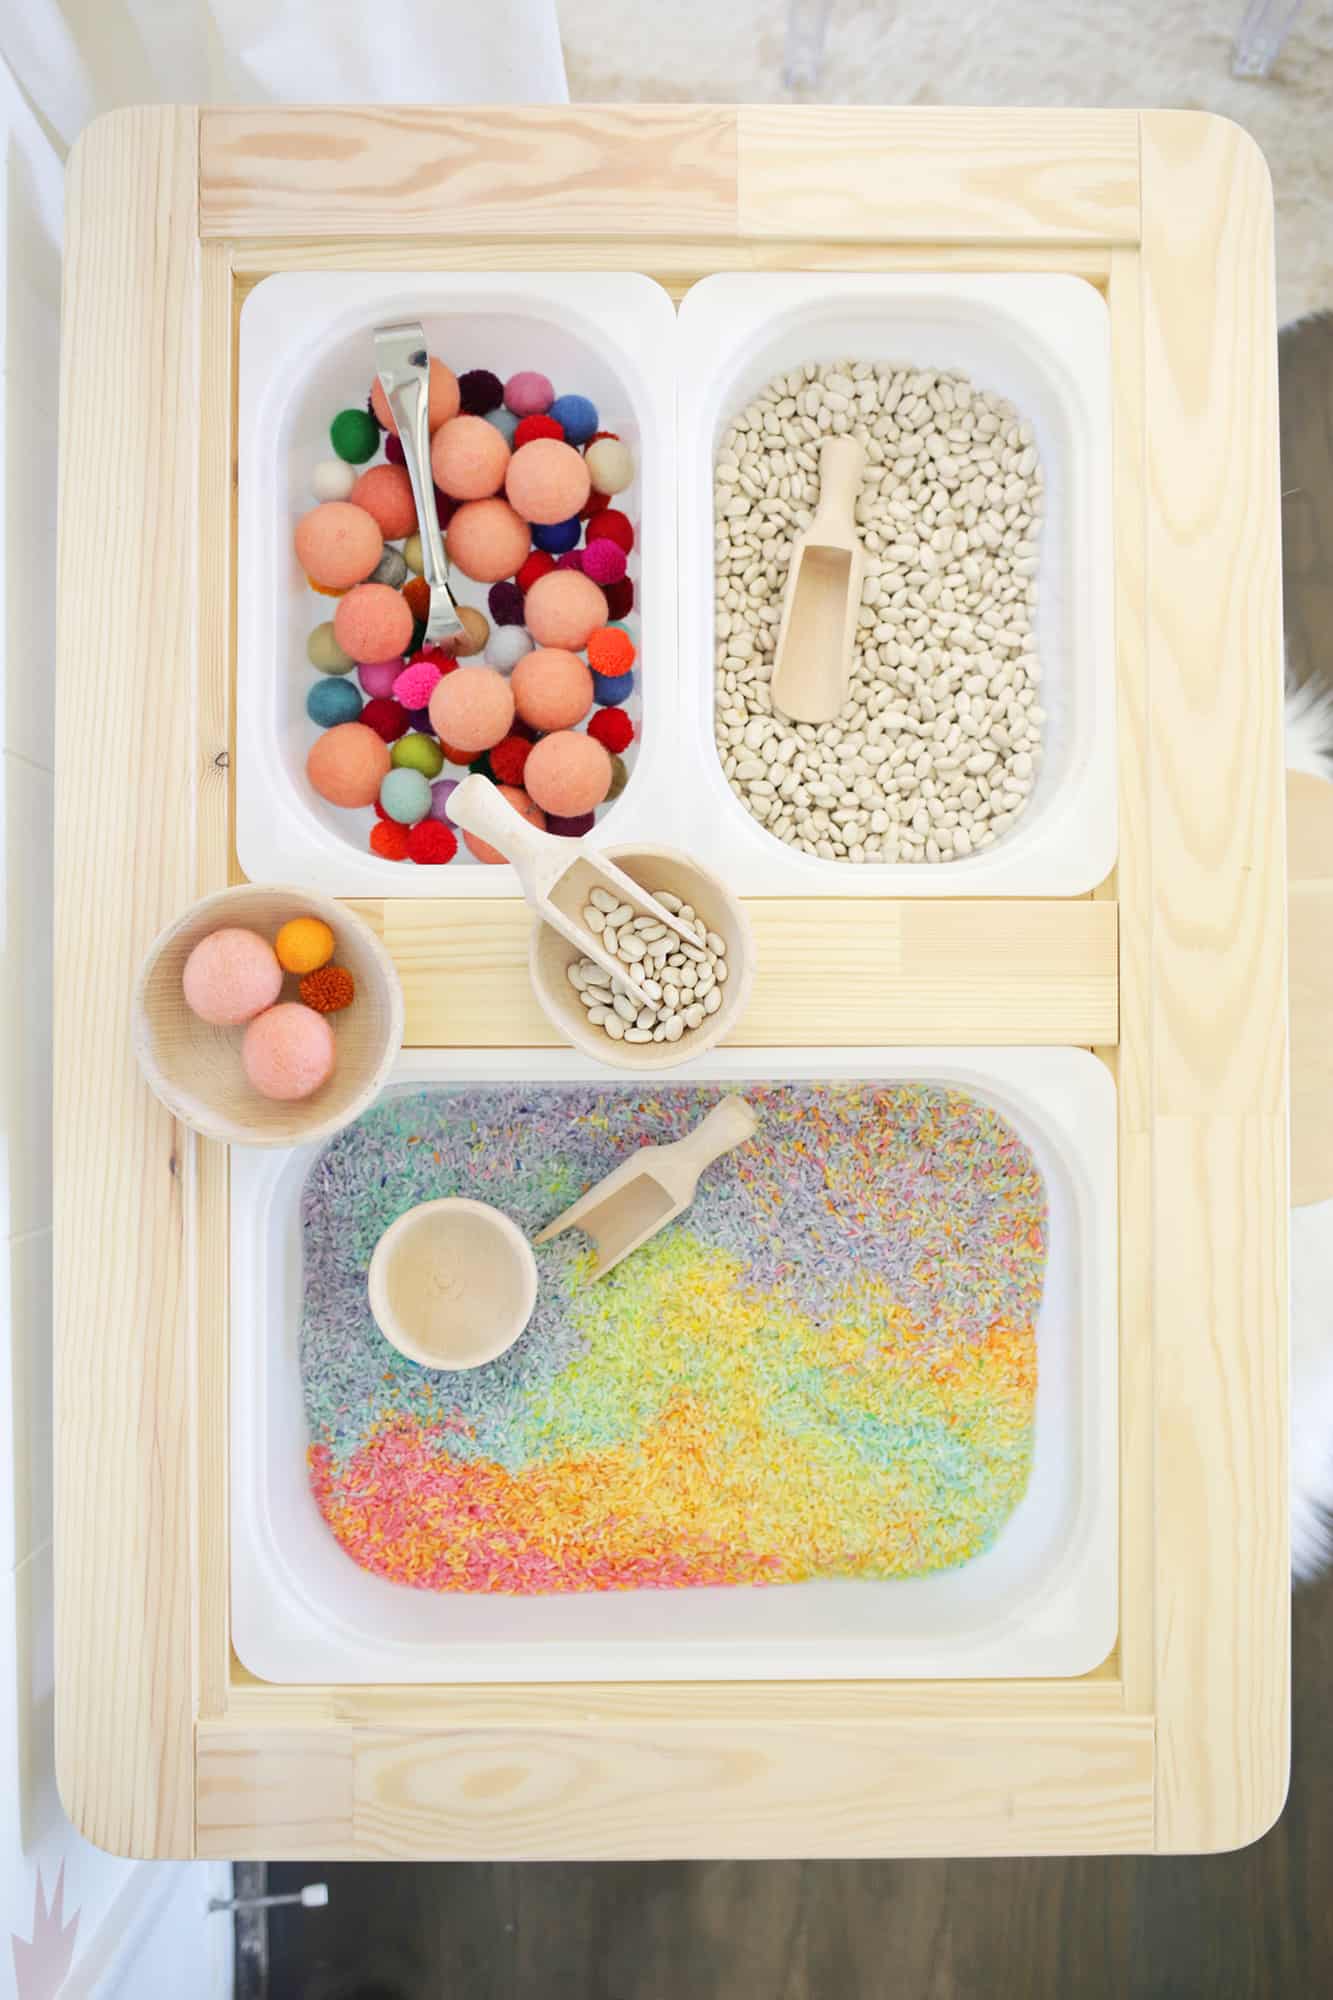 a white bin of colorful rice, a wooden scoop, and a wooden bowl, another white bin of colorful foam balls and tongs, and another white bin of beans and a wooden scoop in sensory table